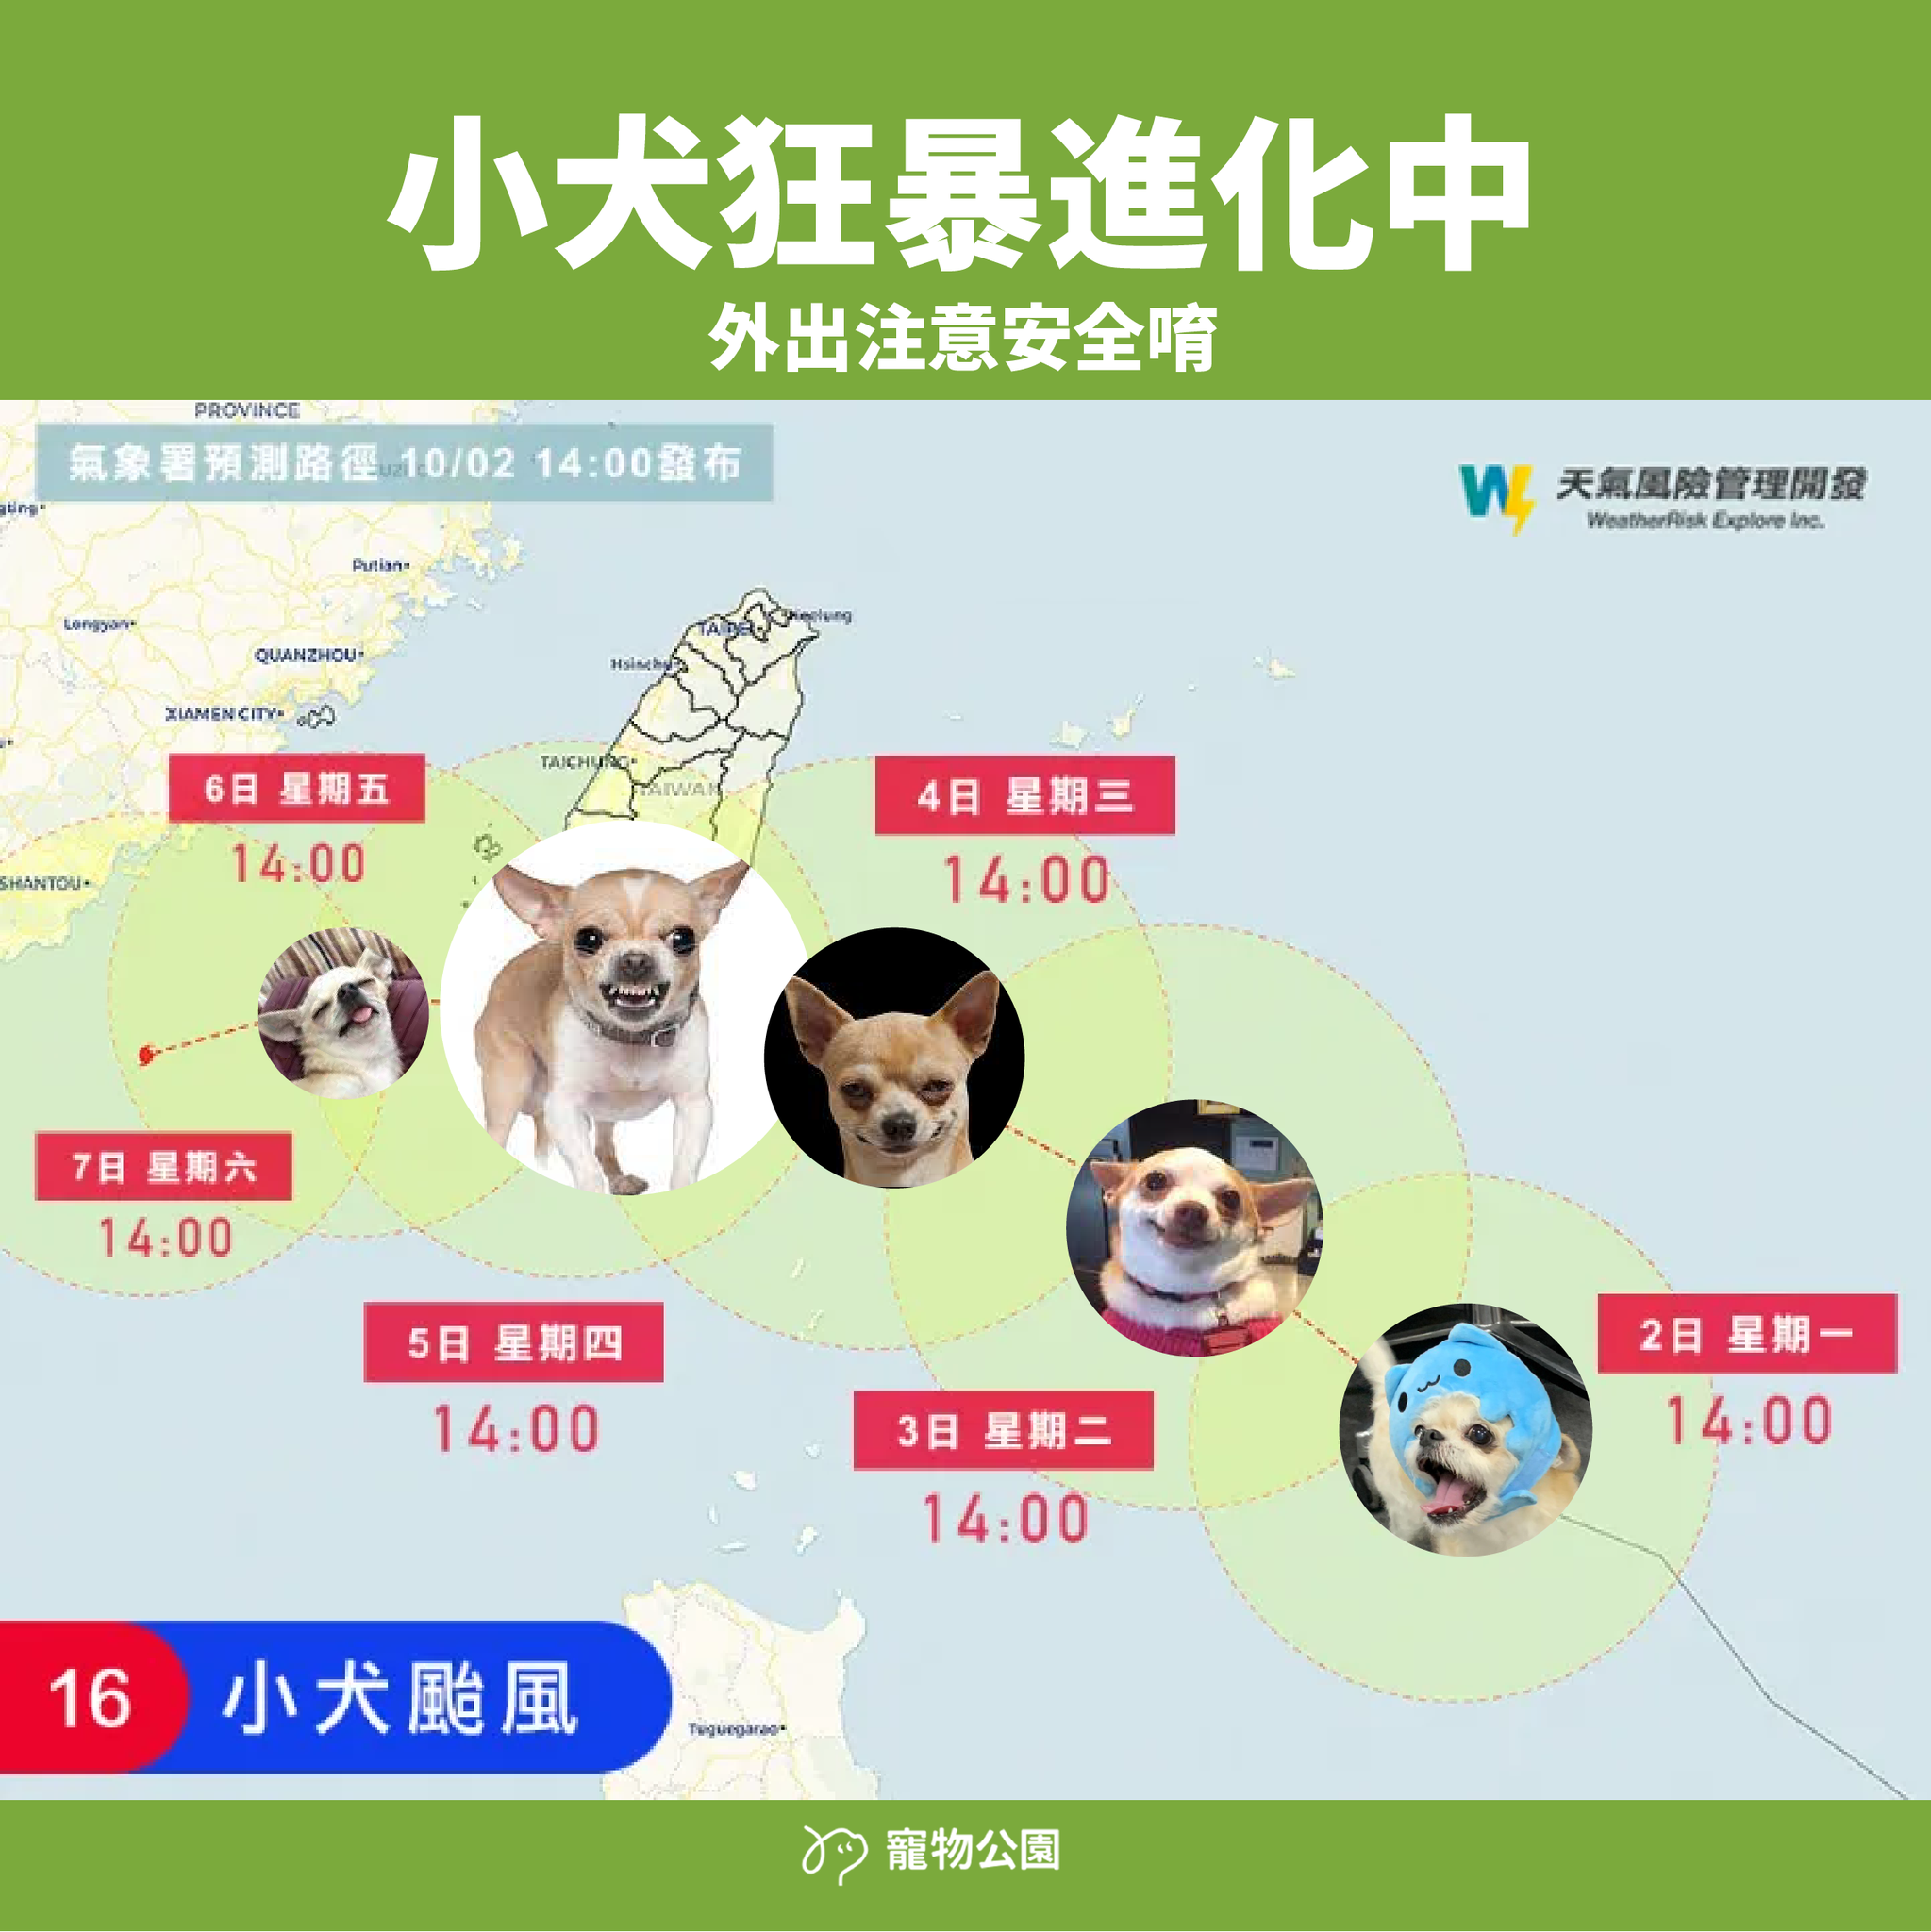 A Typhoon Named “Puppy” In Japanese Hit Taiwan And People Turned It Into A Huge Meme